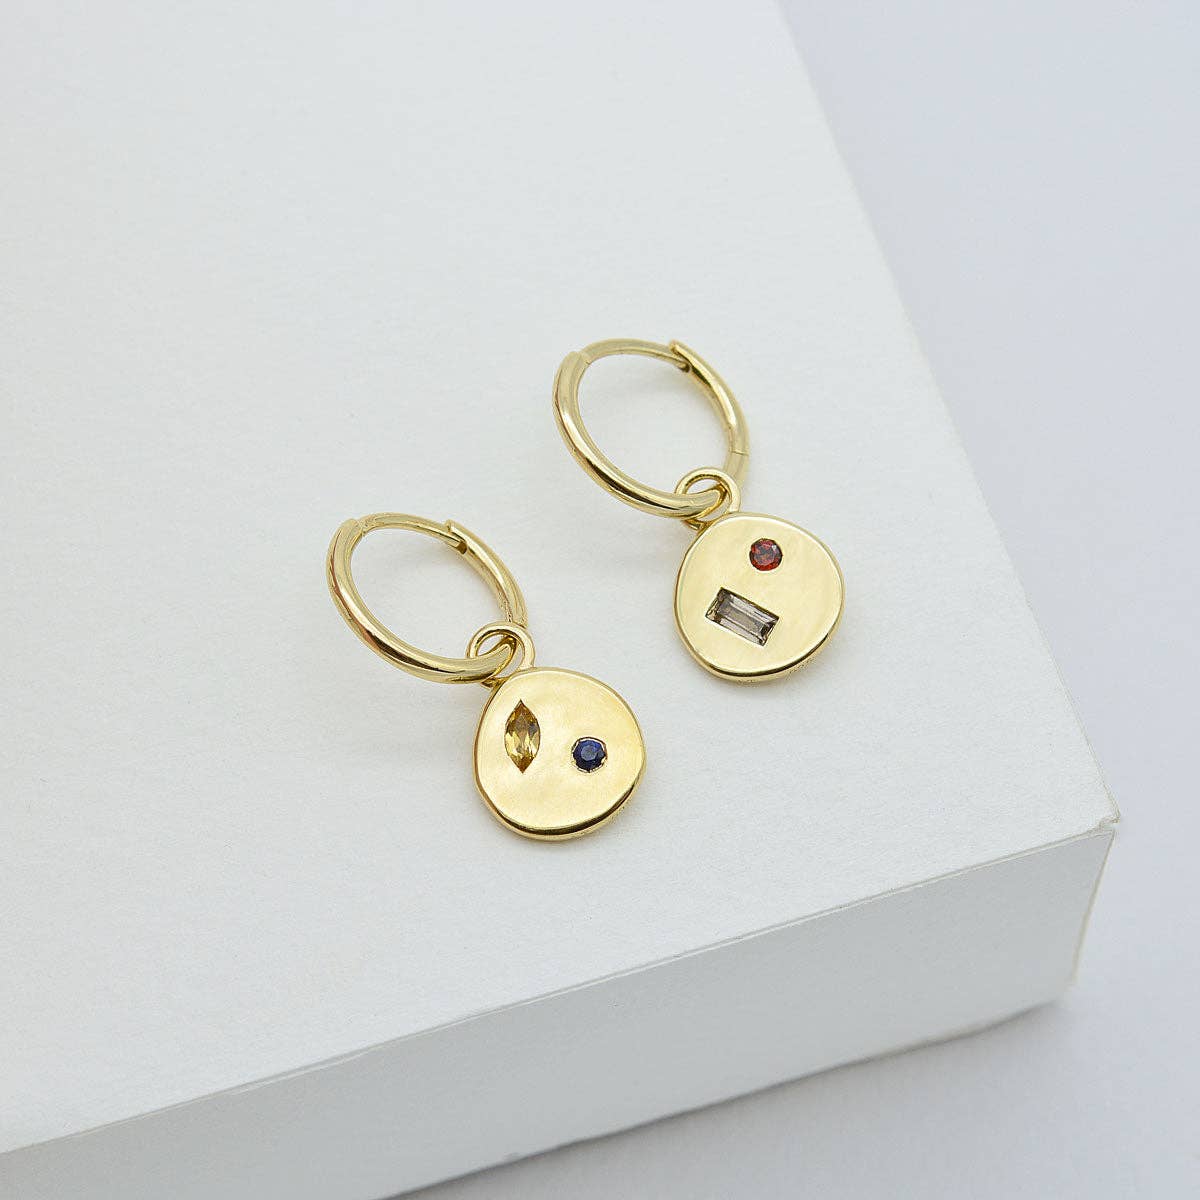 Kaleidoscopic Charm Huggie Earrings: Gold Plated Sterling Silver